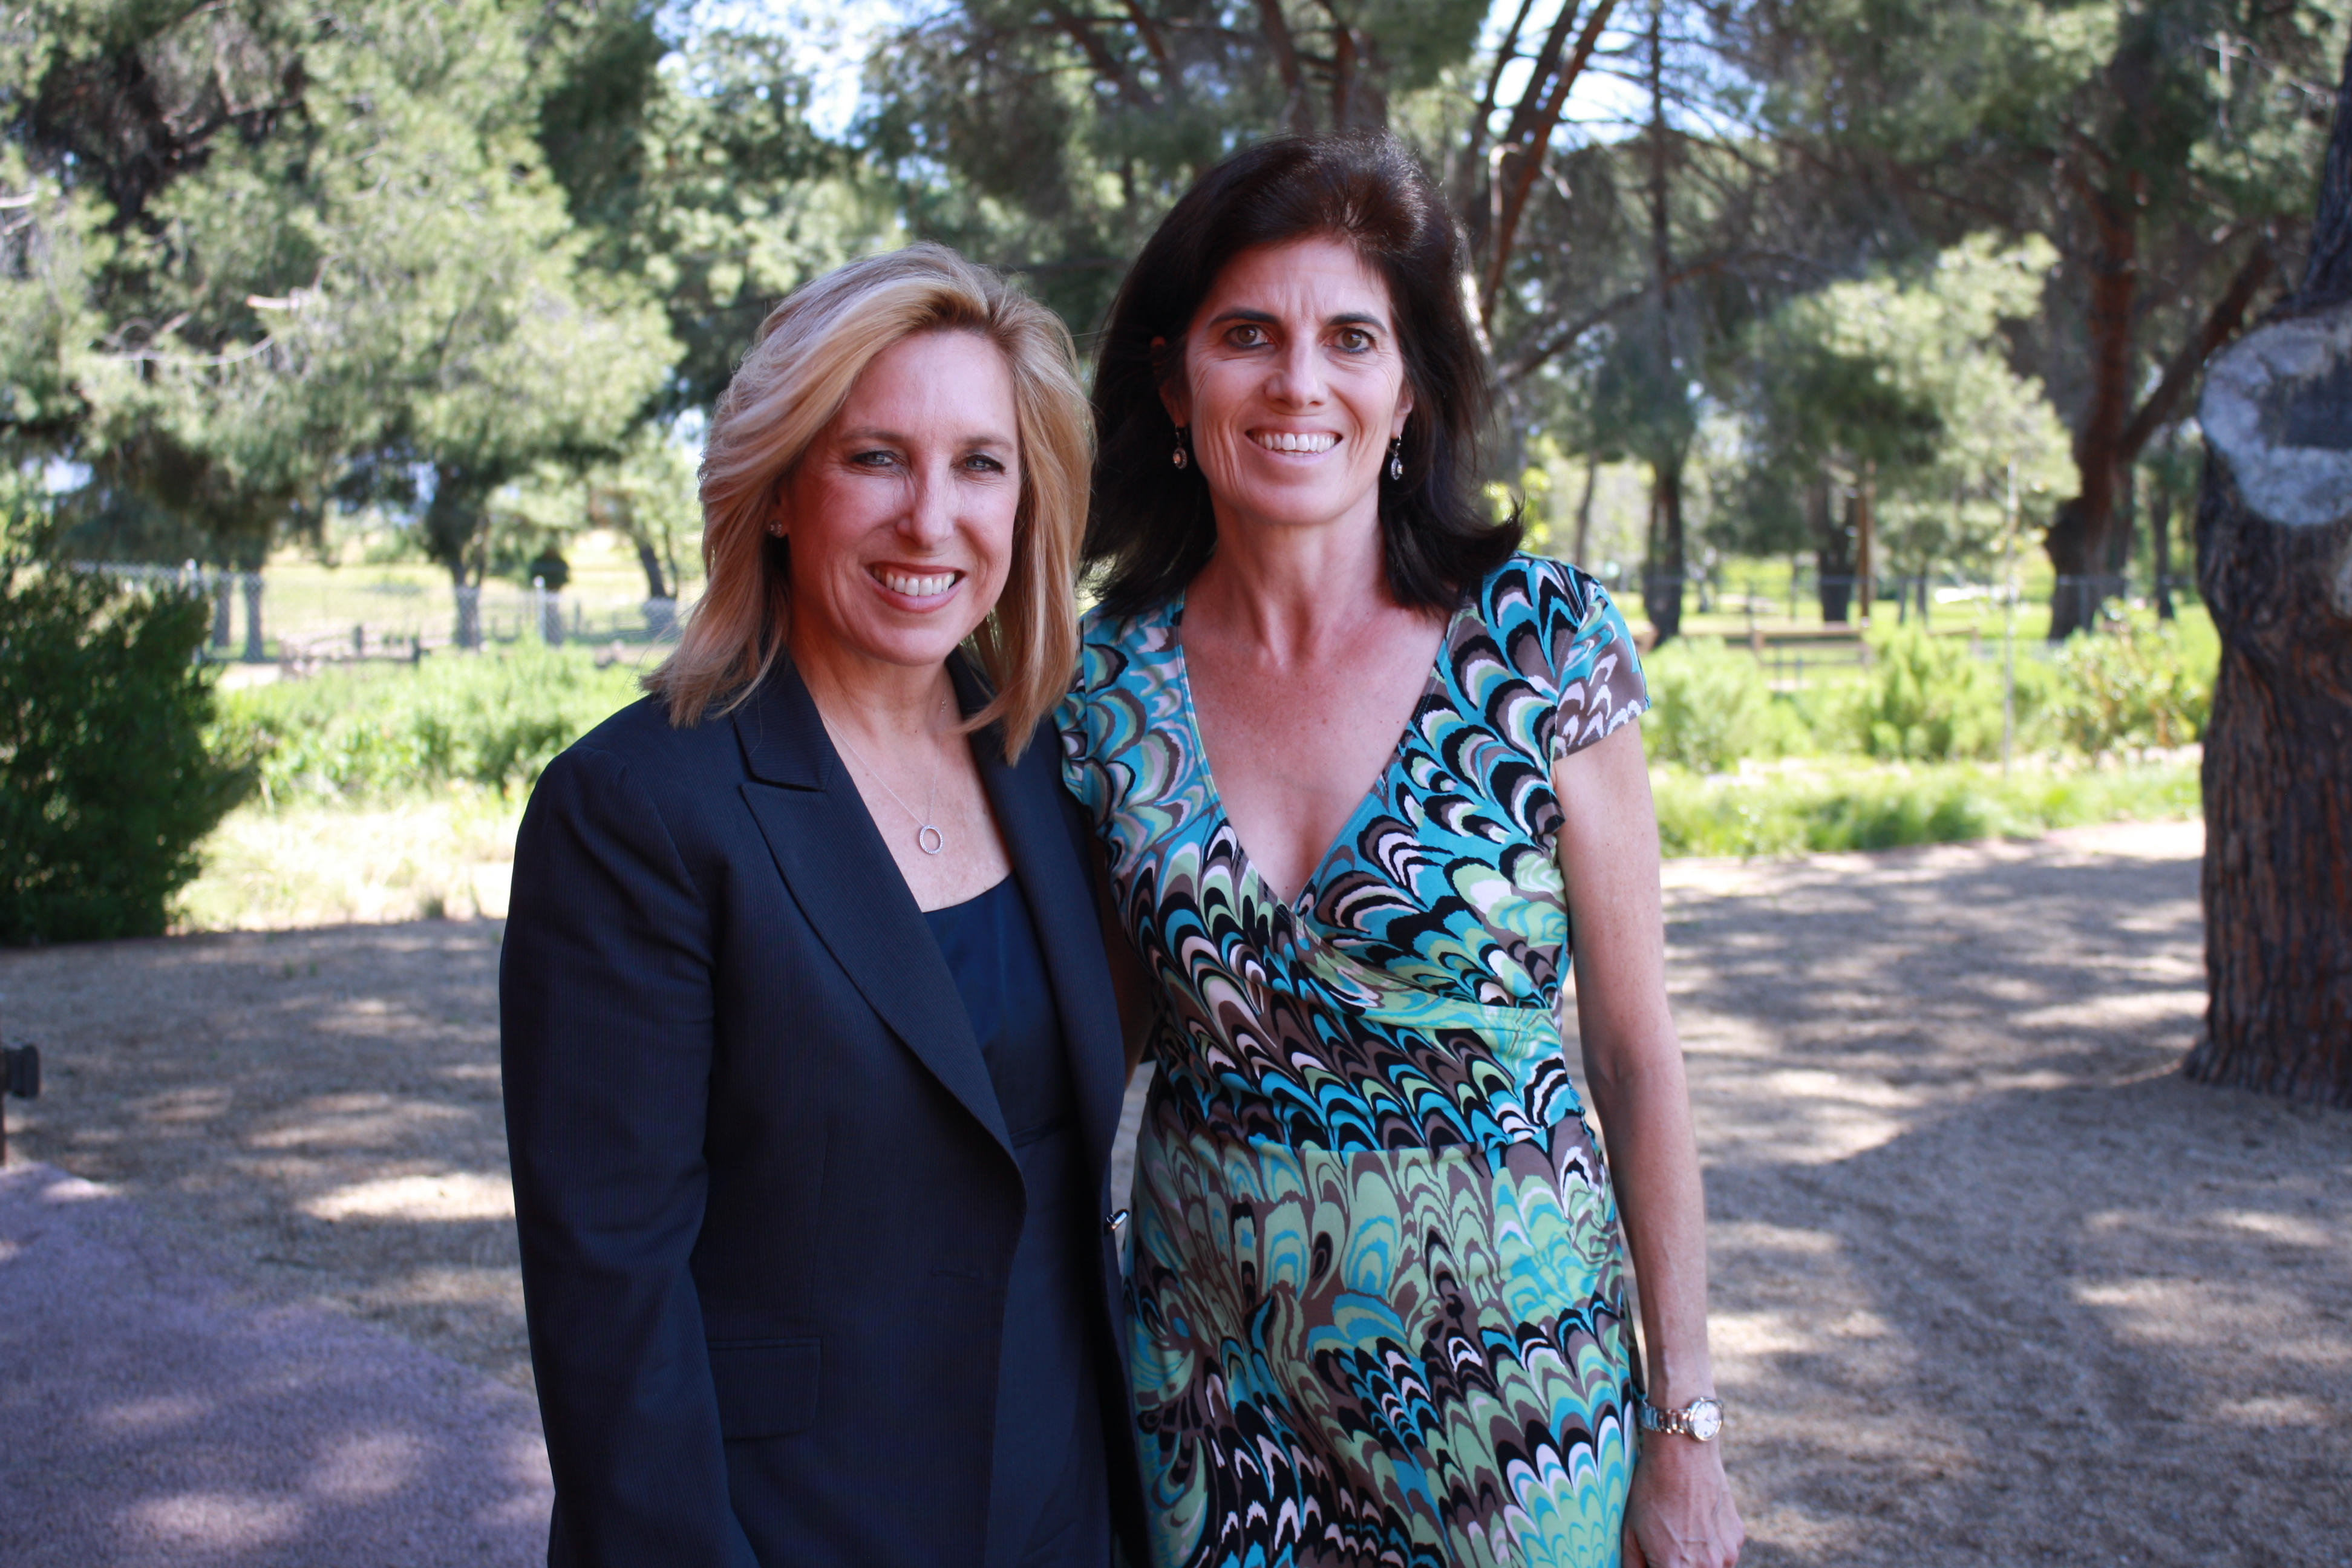 Wendy Greuel poses with Natalie Fousekis outside